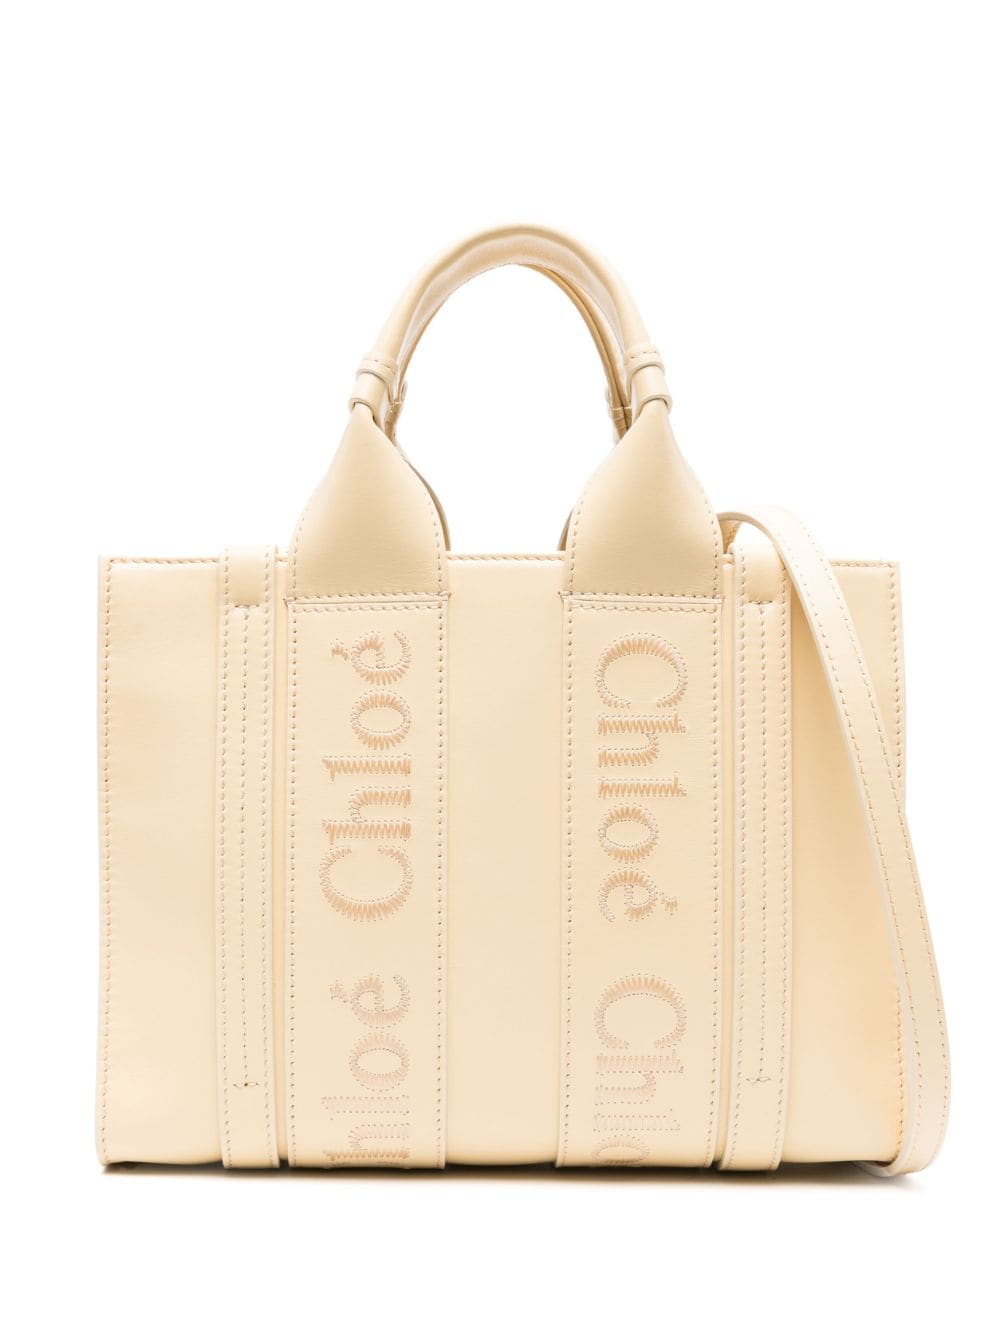 CHLOÉ Pastel Yellow Leather Embroidered Logo Tote with Gold-Tone Hardware and Detachable Shoulder Strap